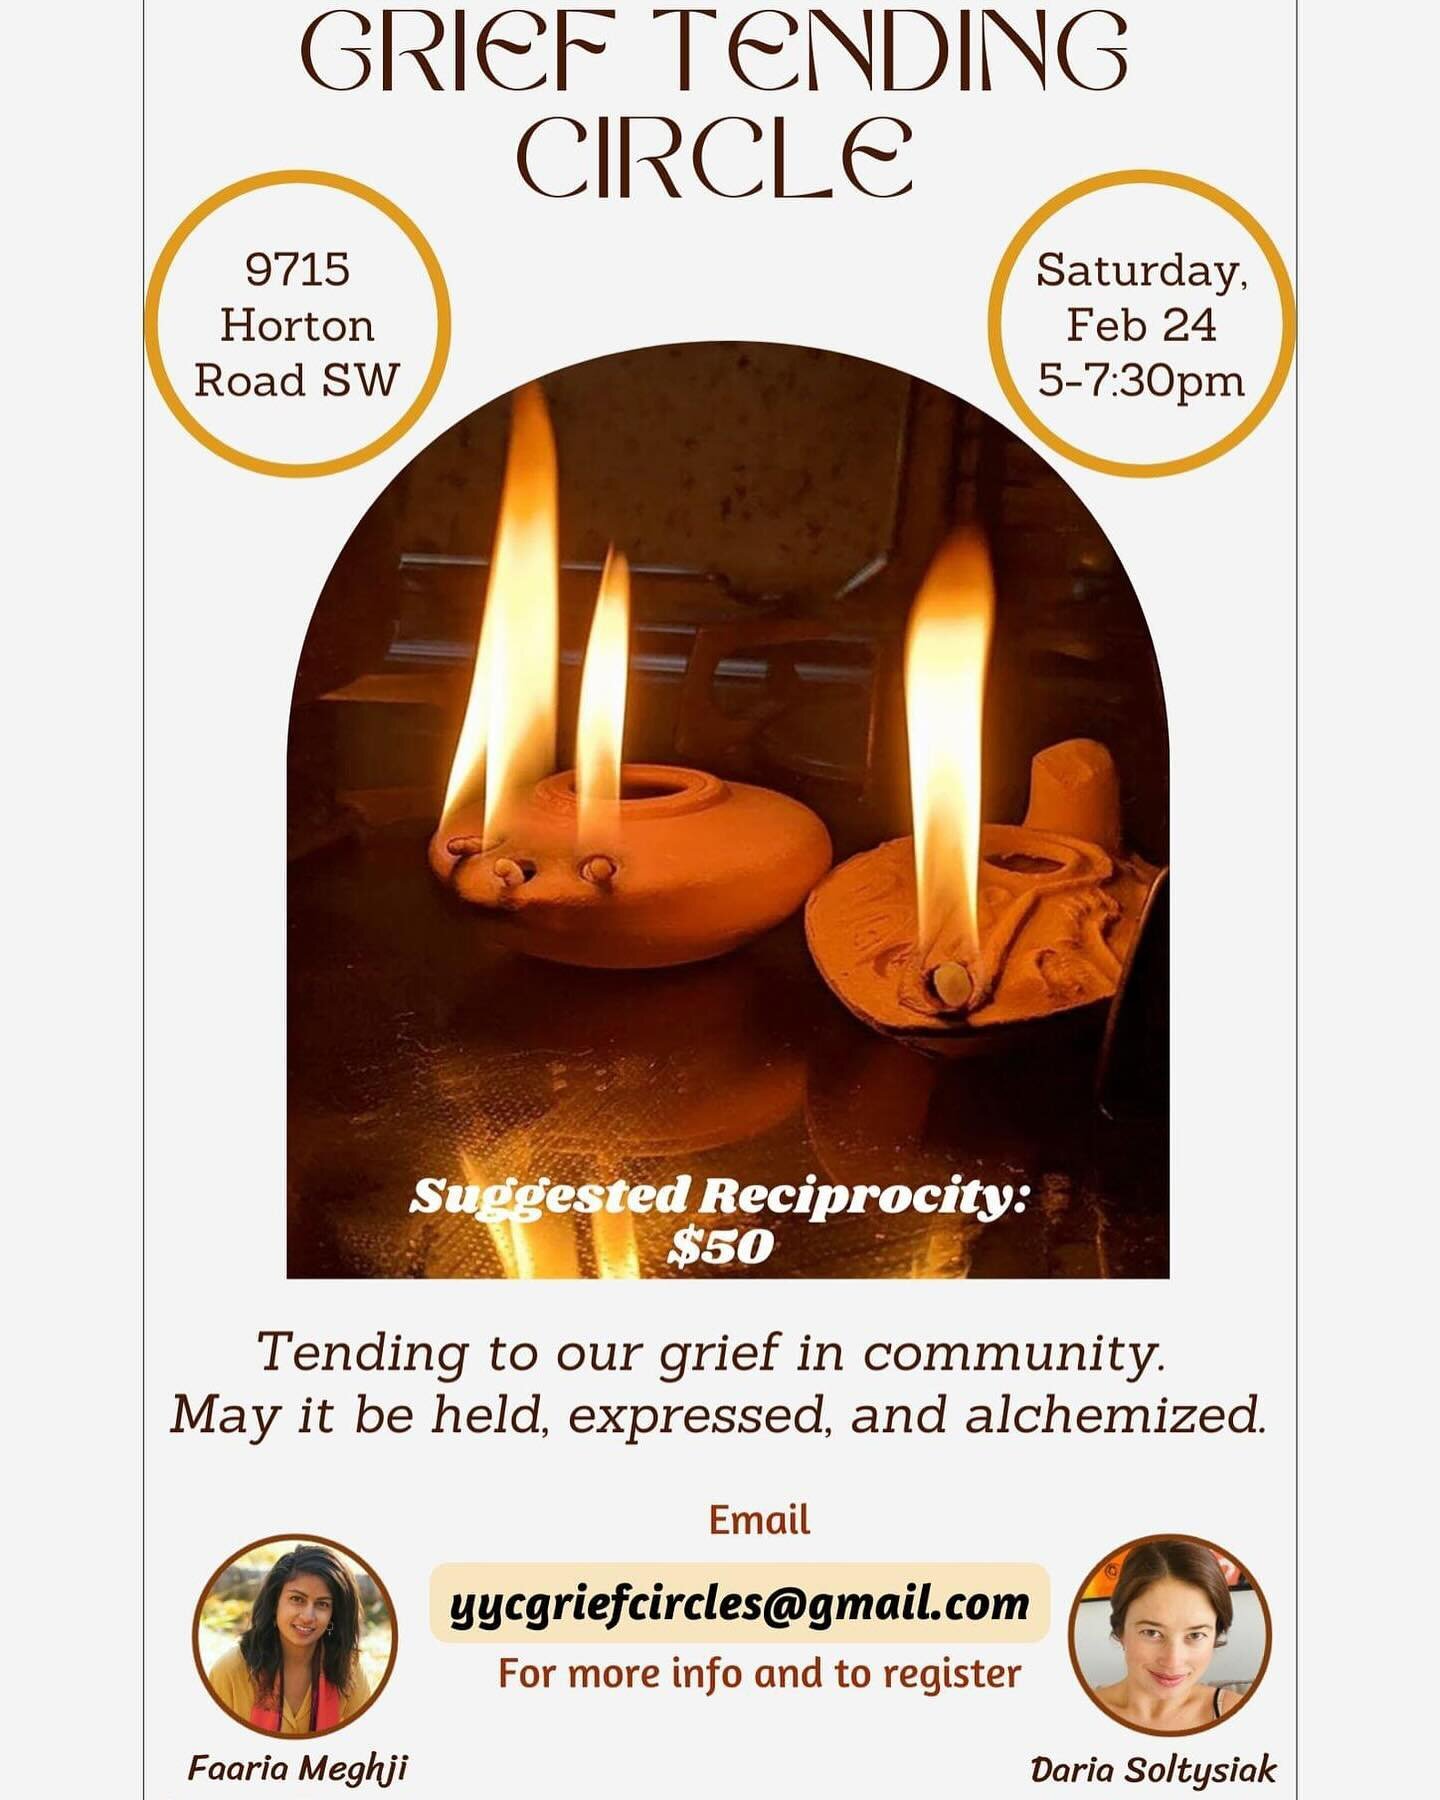 From Faaria @therapywithfaaria 

Inviting you and any clients you feel may benefit from a grief tending circle. I&rsquo;m really feeling into the need to de-stigmatize  grief and create space for it to be held in community. Open to all types of grief